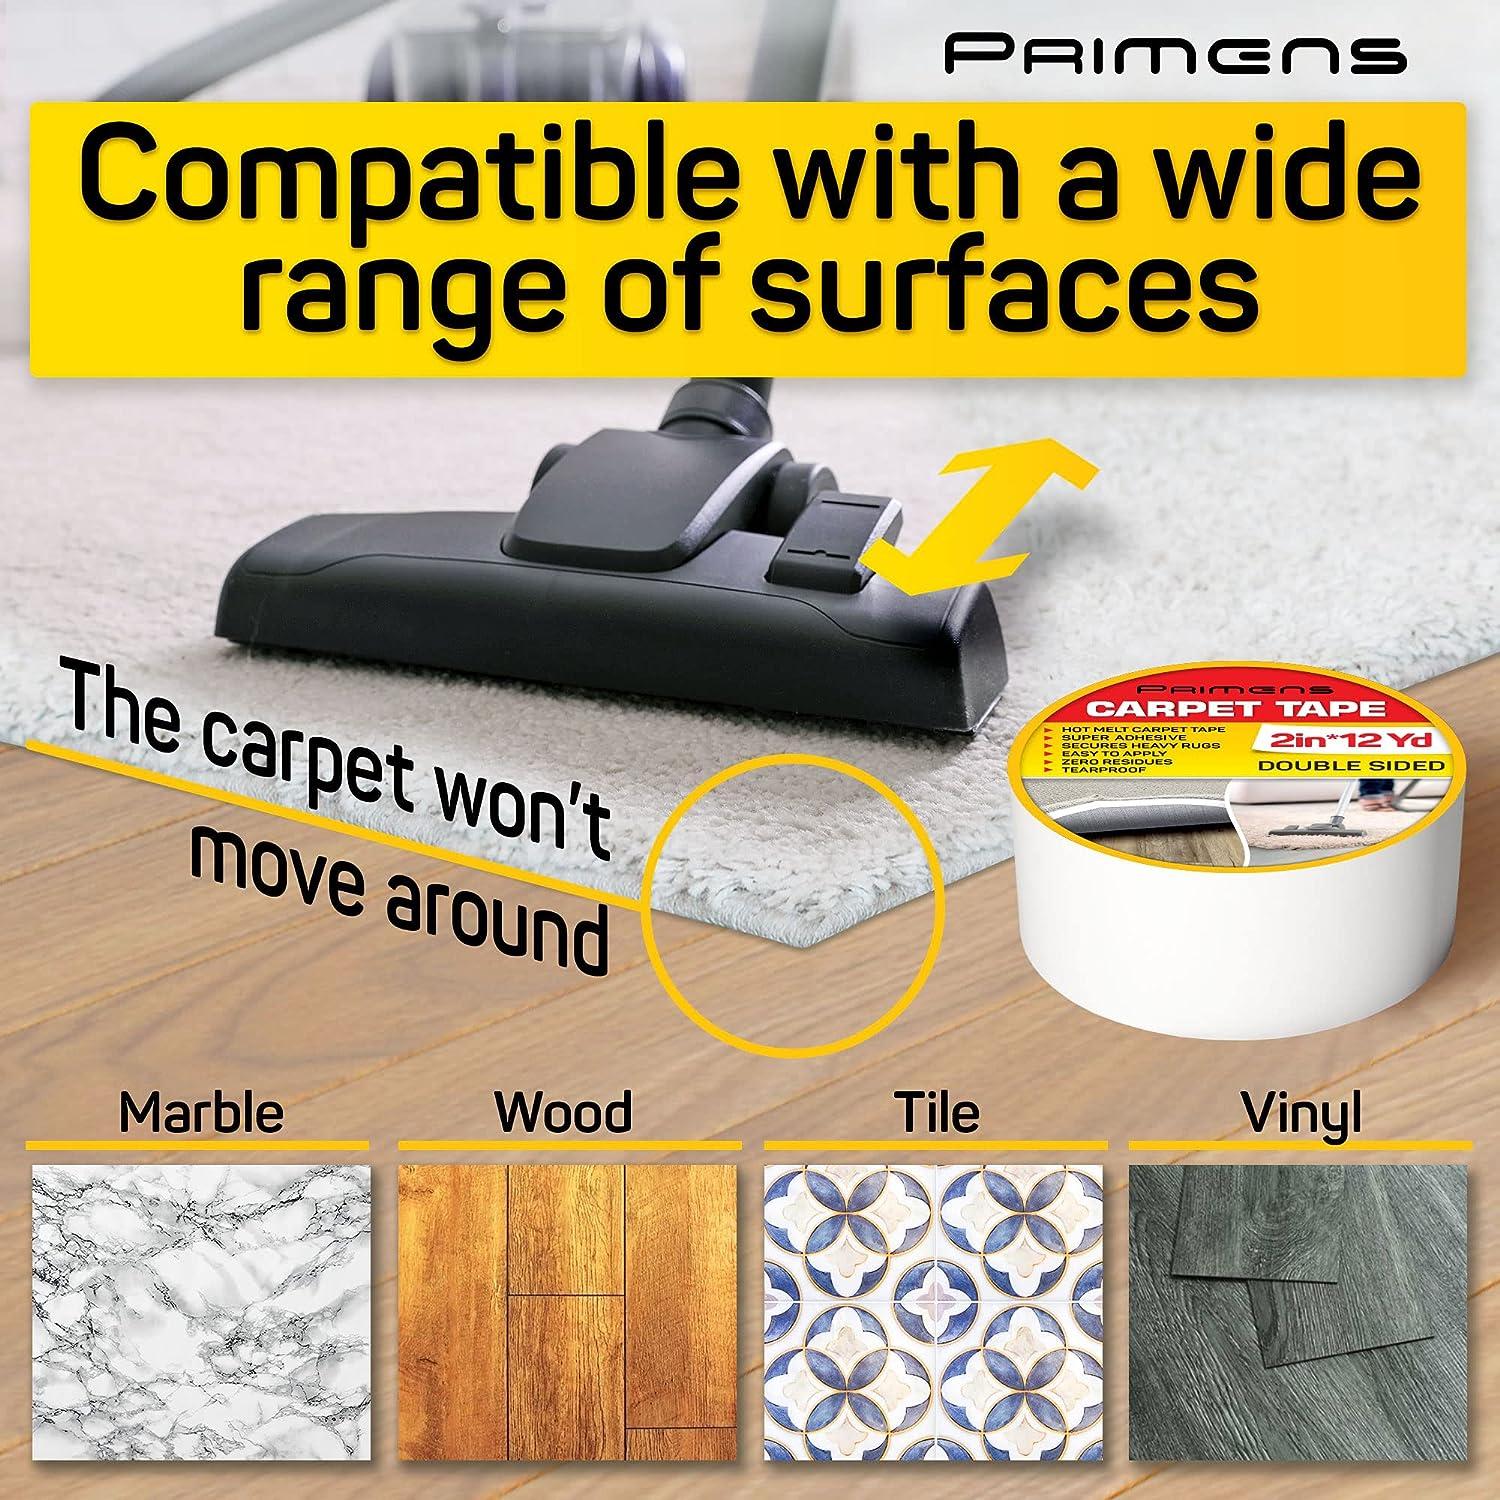 Double Sided Carpet Tape - Rug Grippers Tape for Area Rugs and